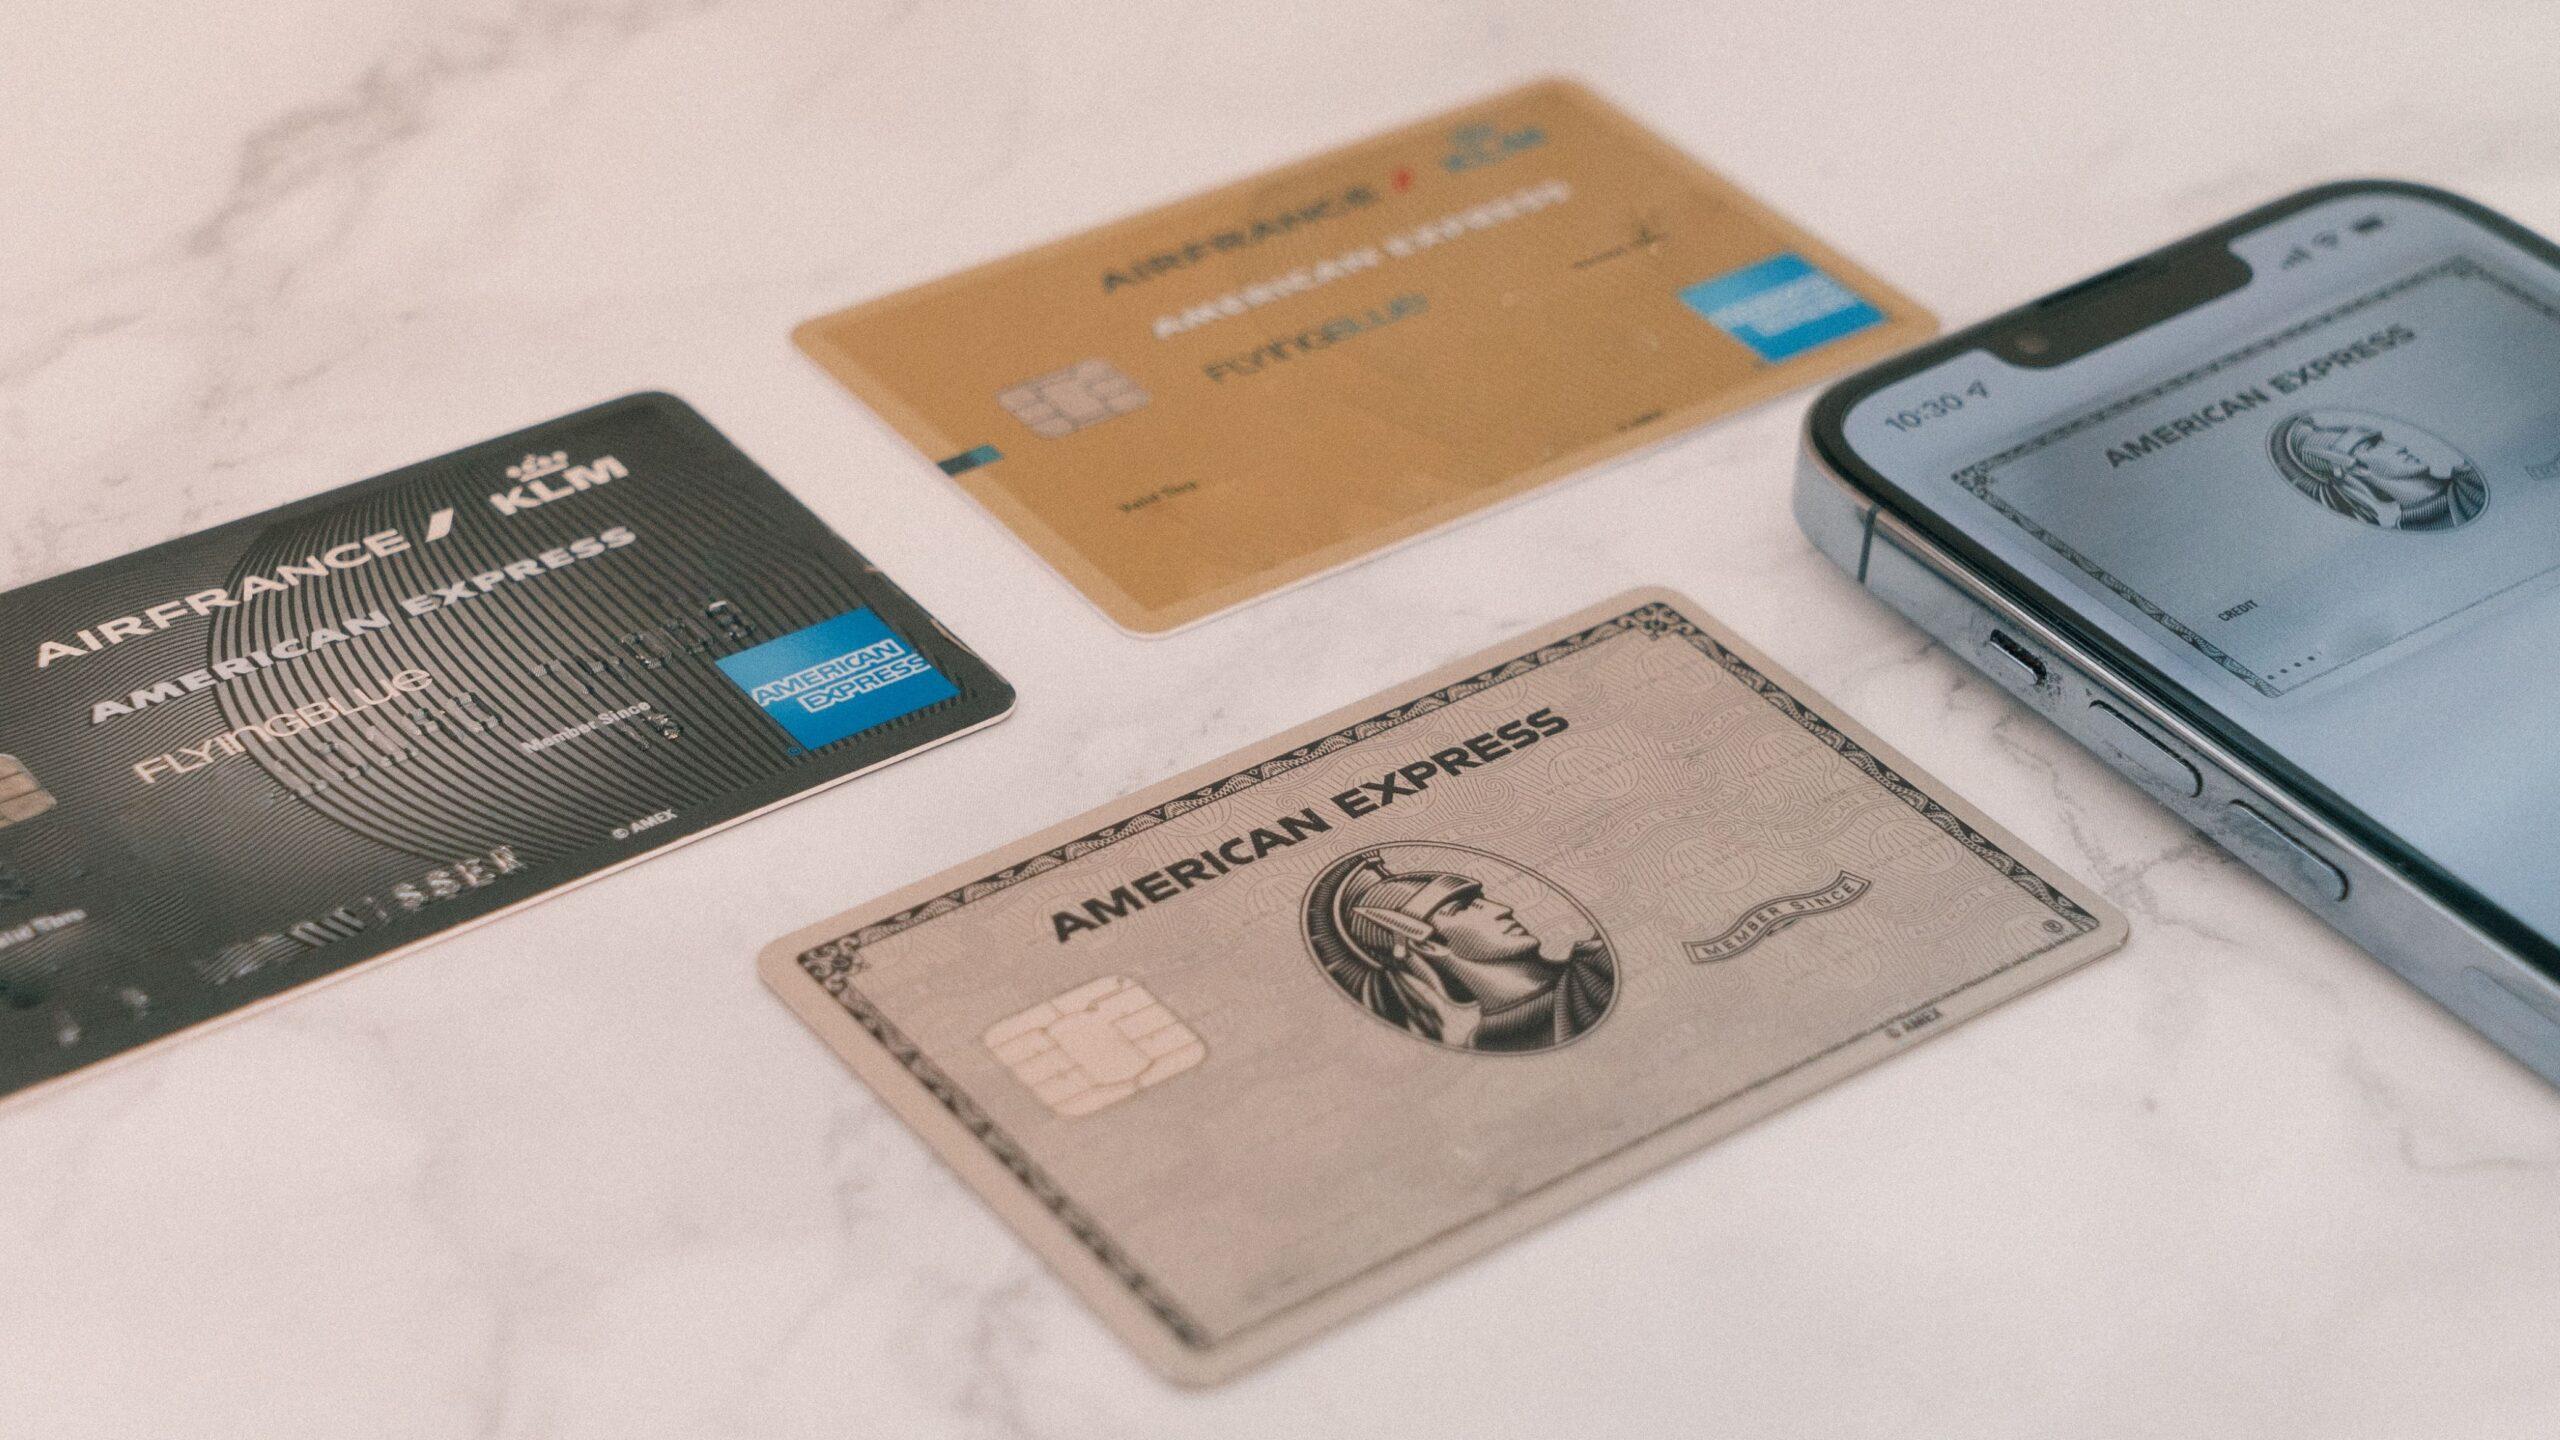 American Express credit cards appearing on a flat surface next to a smartphone.